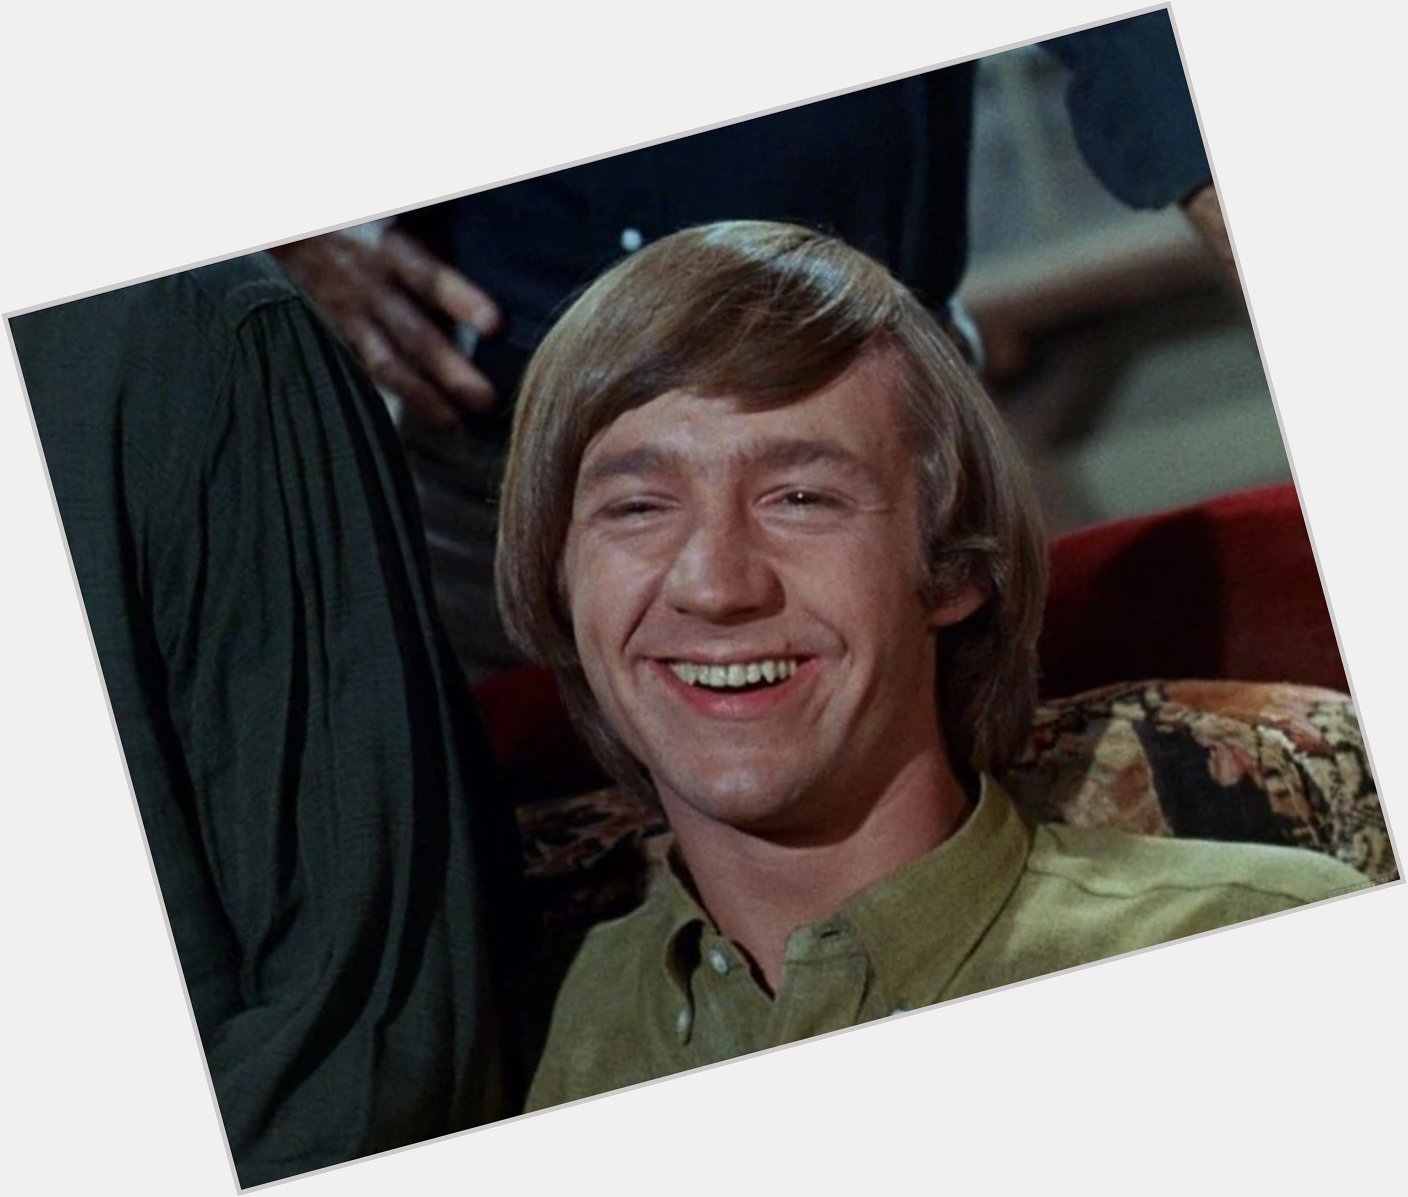 Happy birthday to the wonderful Peter Tork!! You are SO loved and missed   